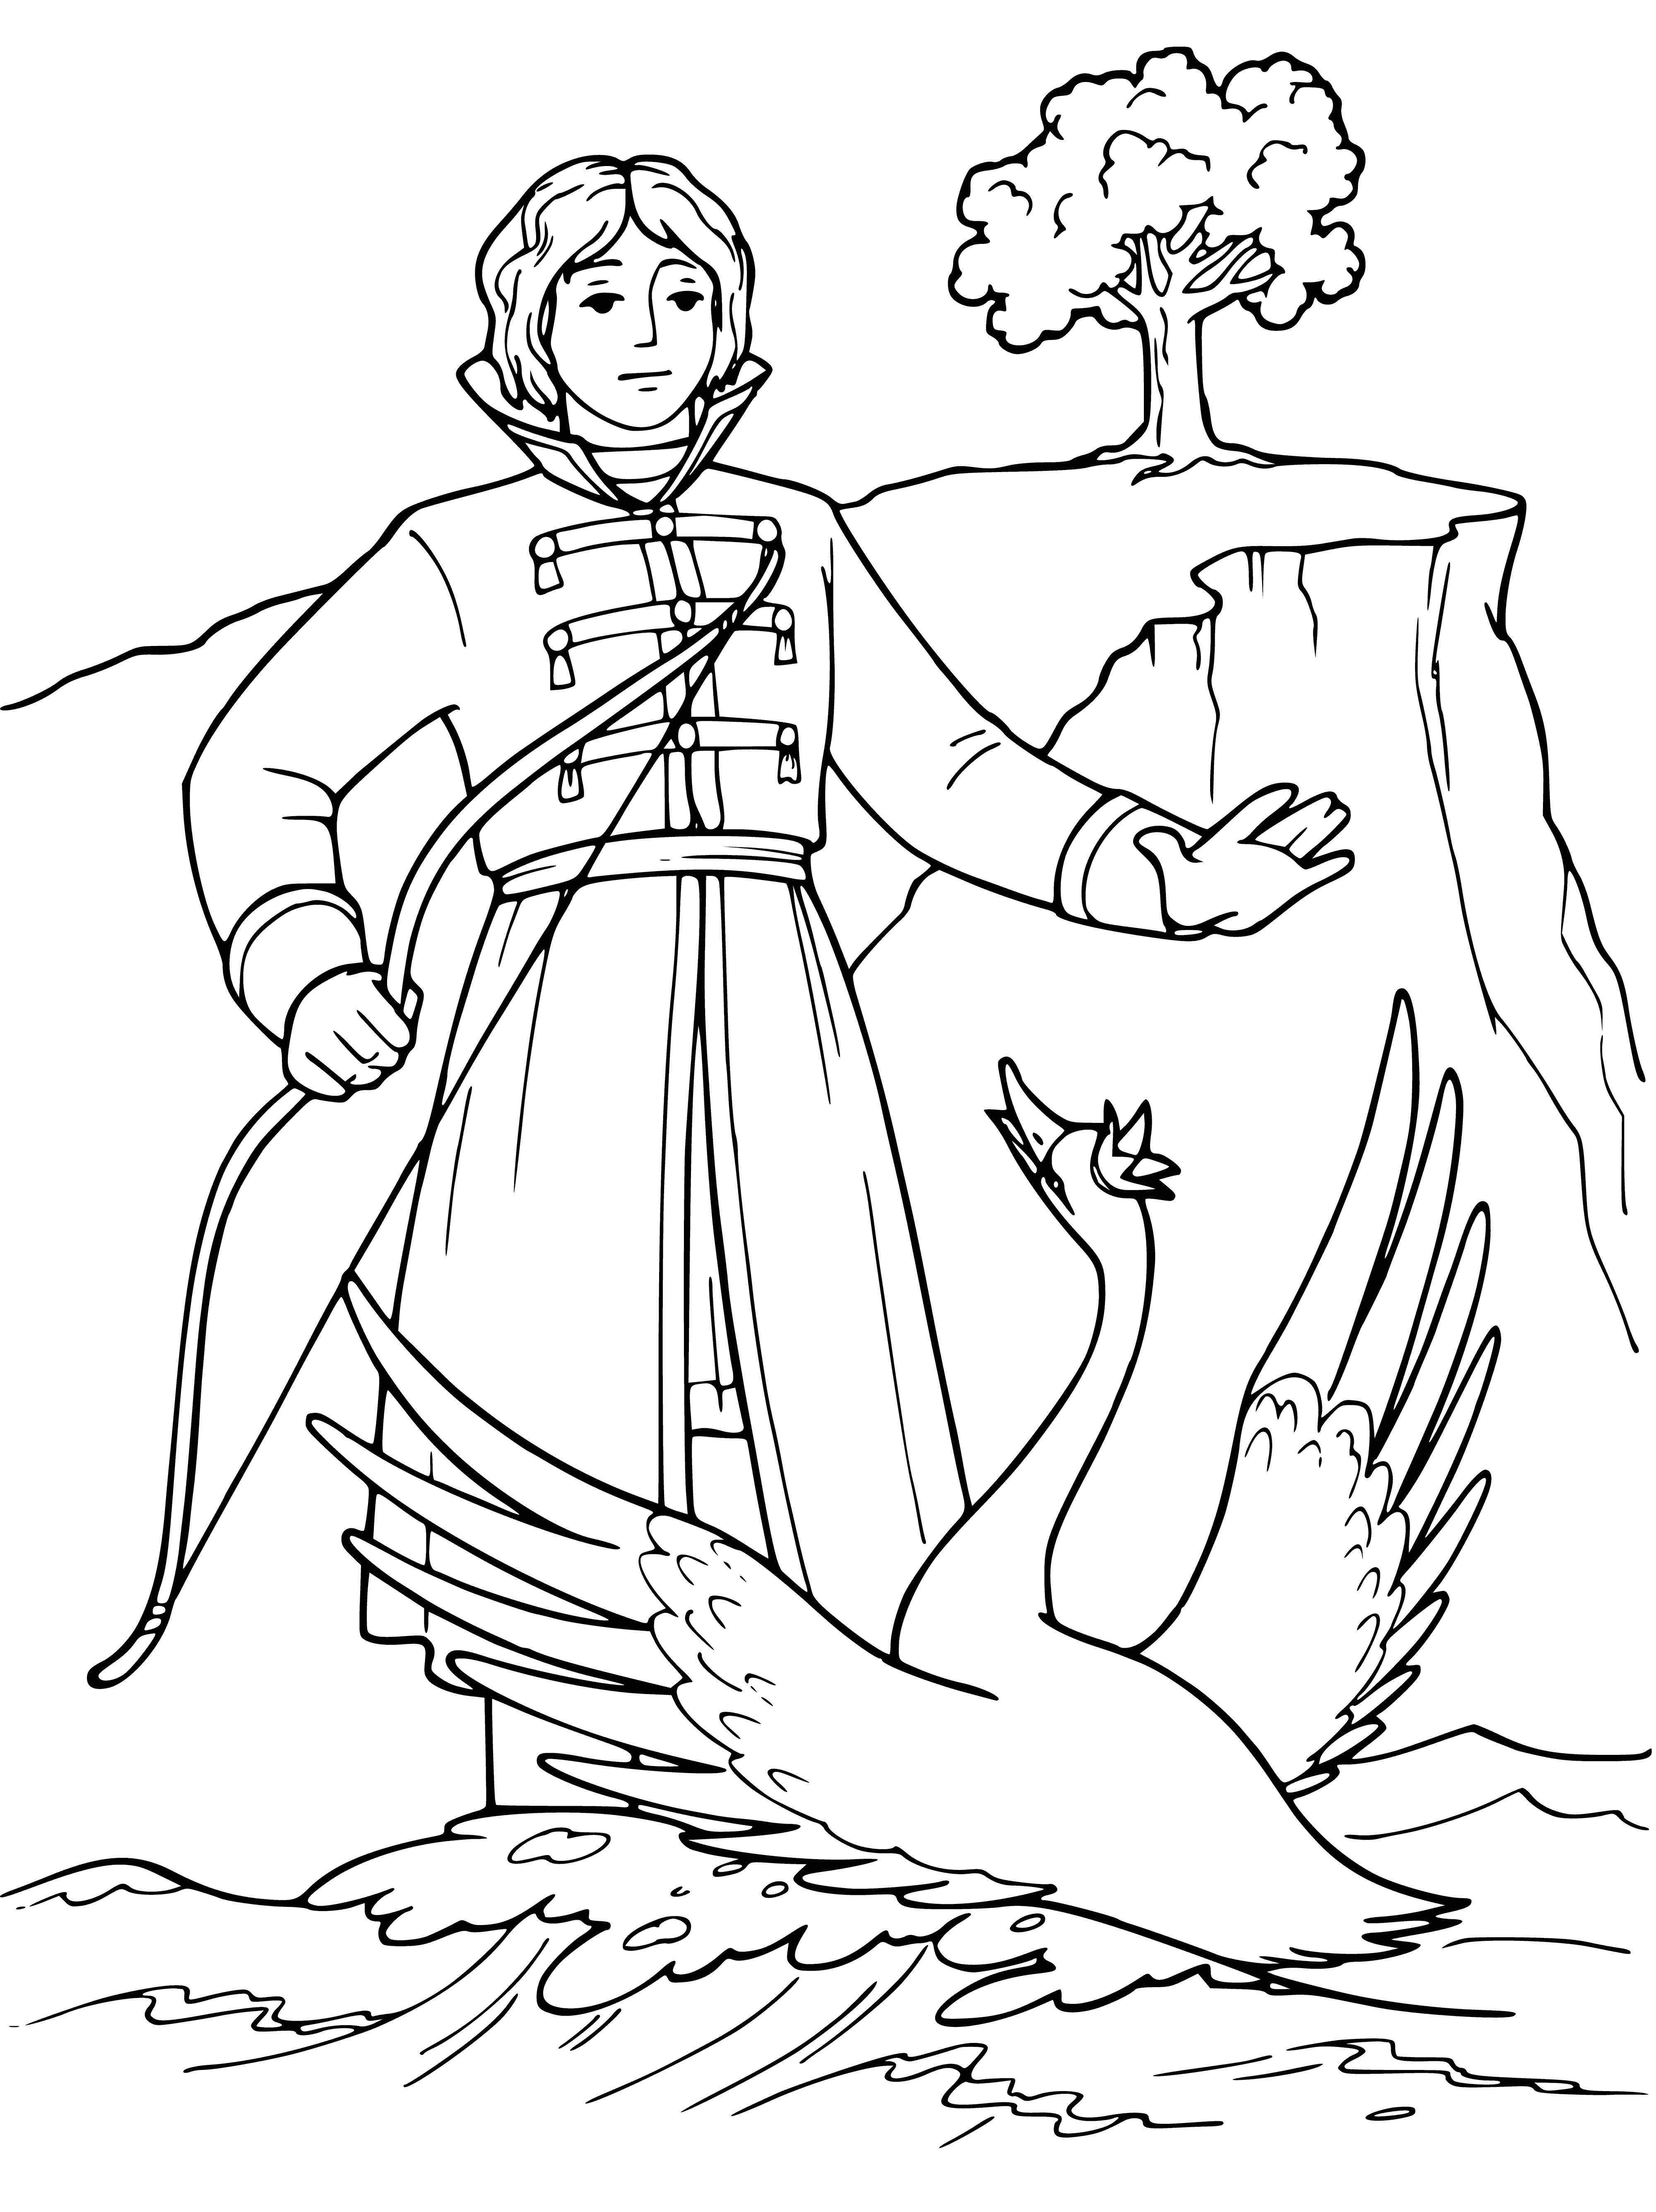 Guidon will save the swan coloring page